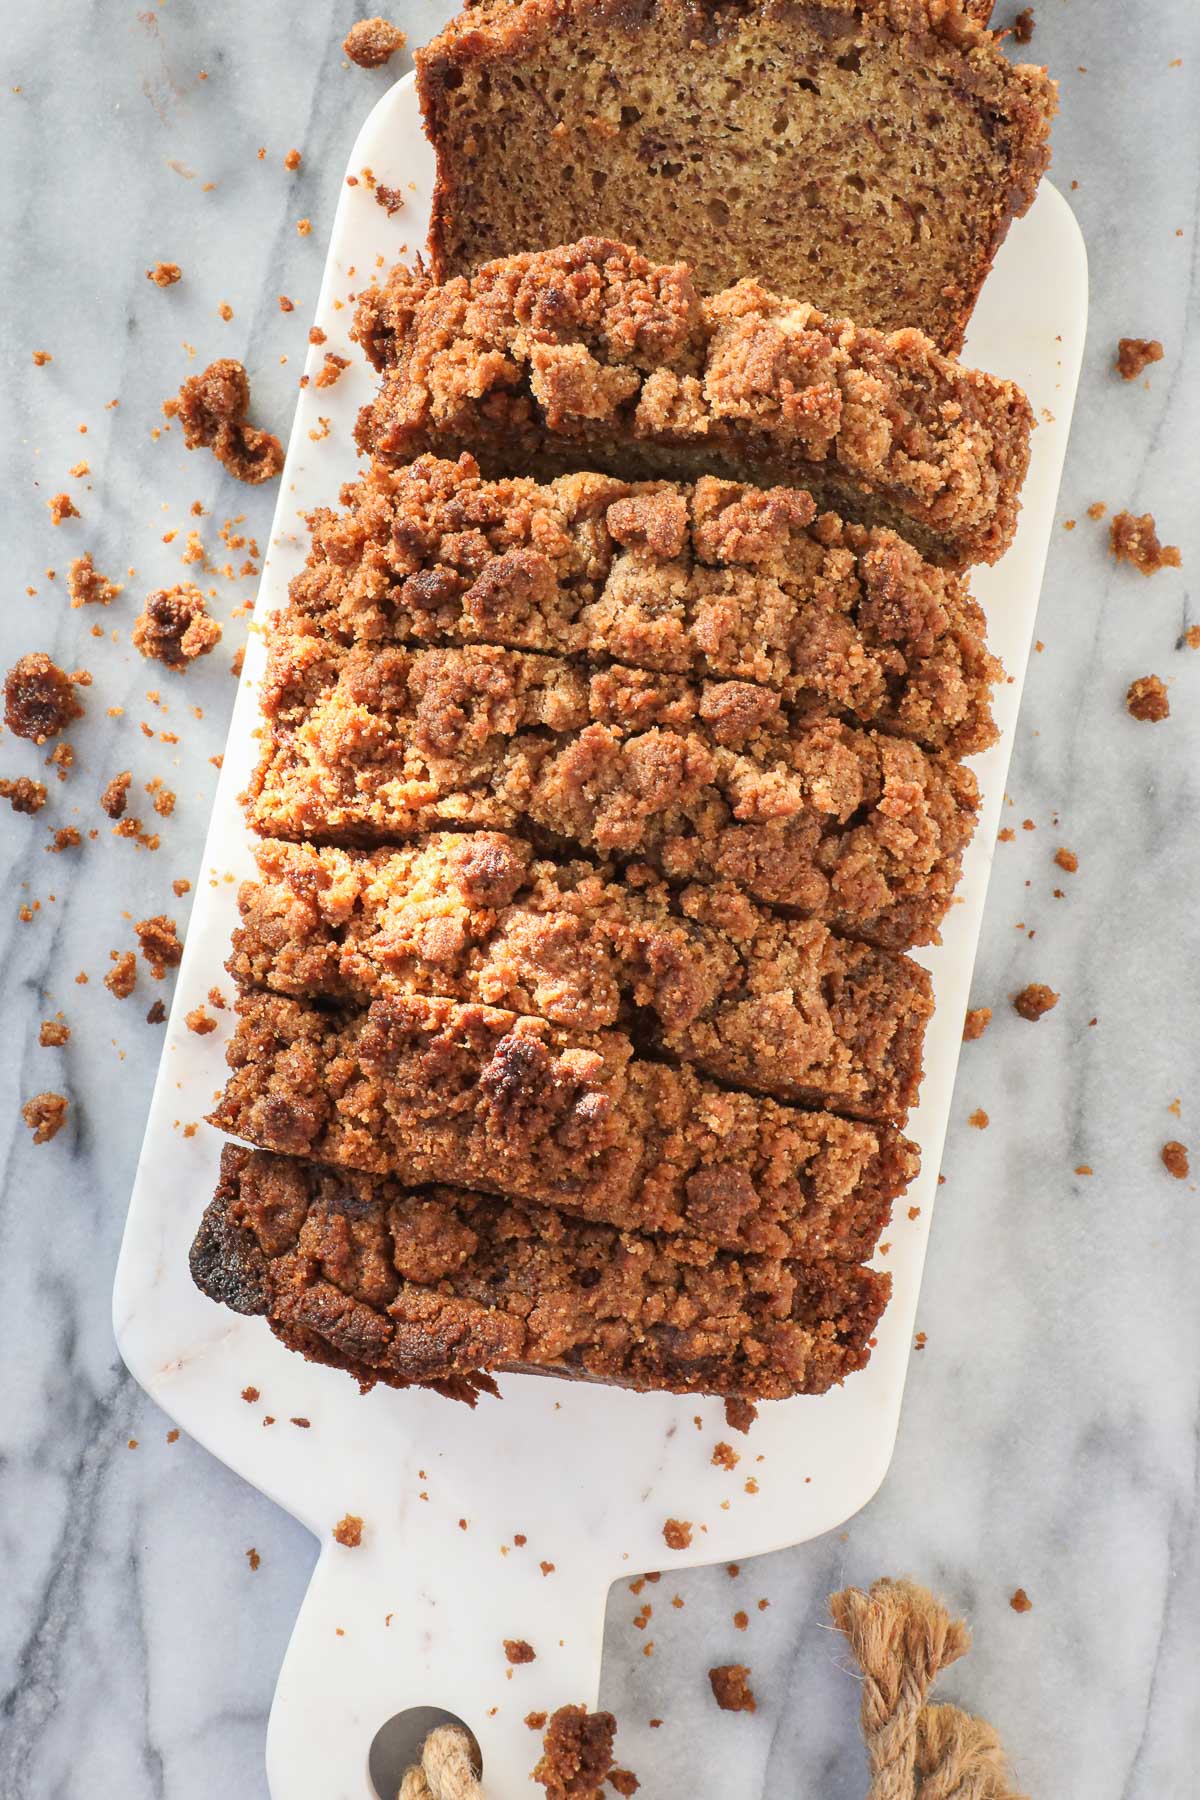 Thick slices of banana bread with streusel topping on a white serving board surrounded by crumbs.